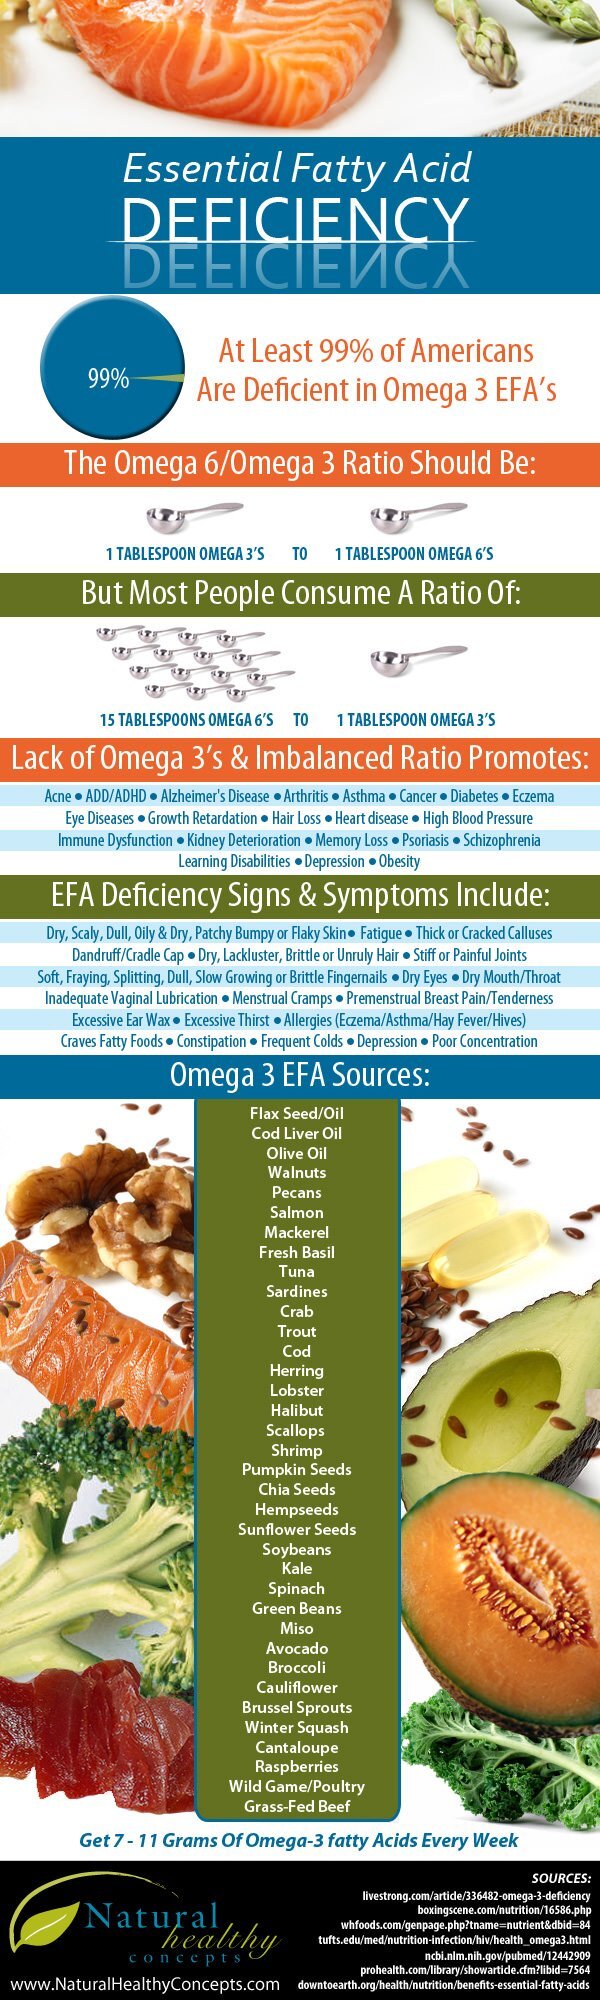 Essential Fatty Acid Deficiency Infographic